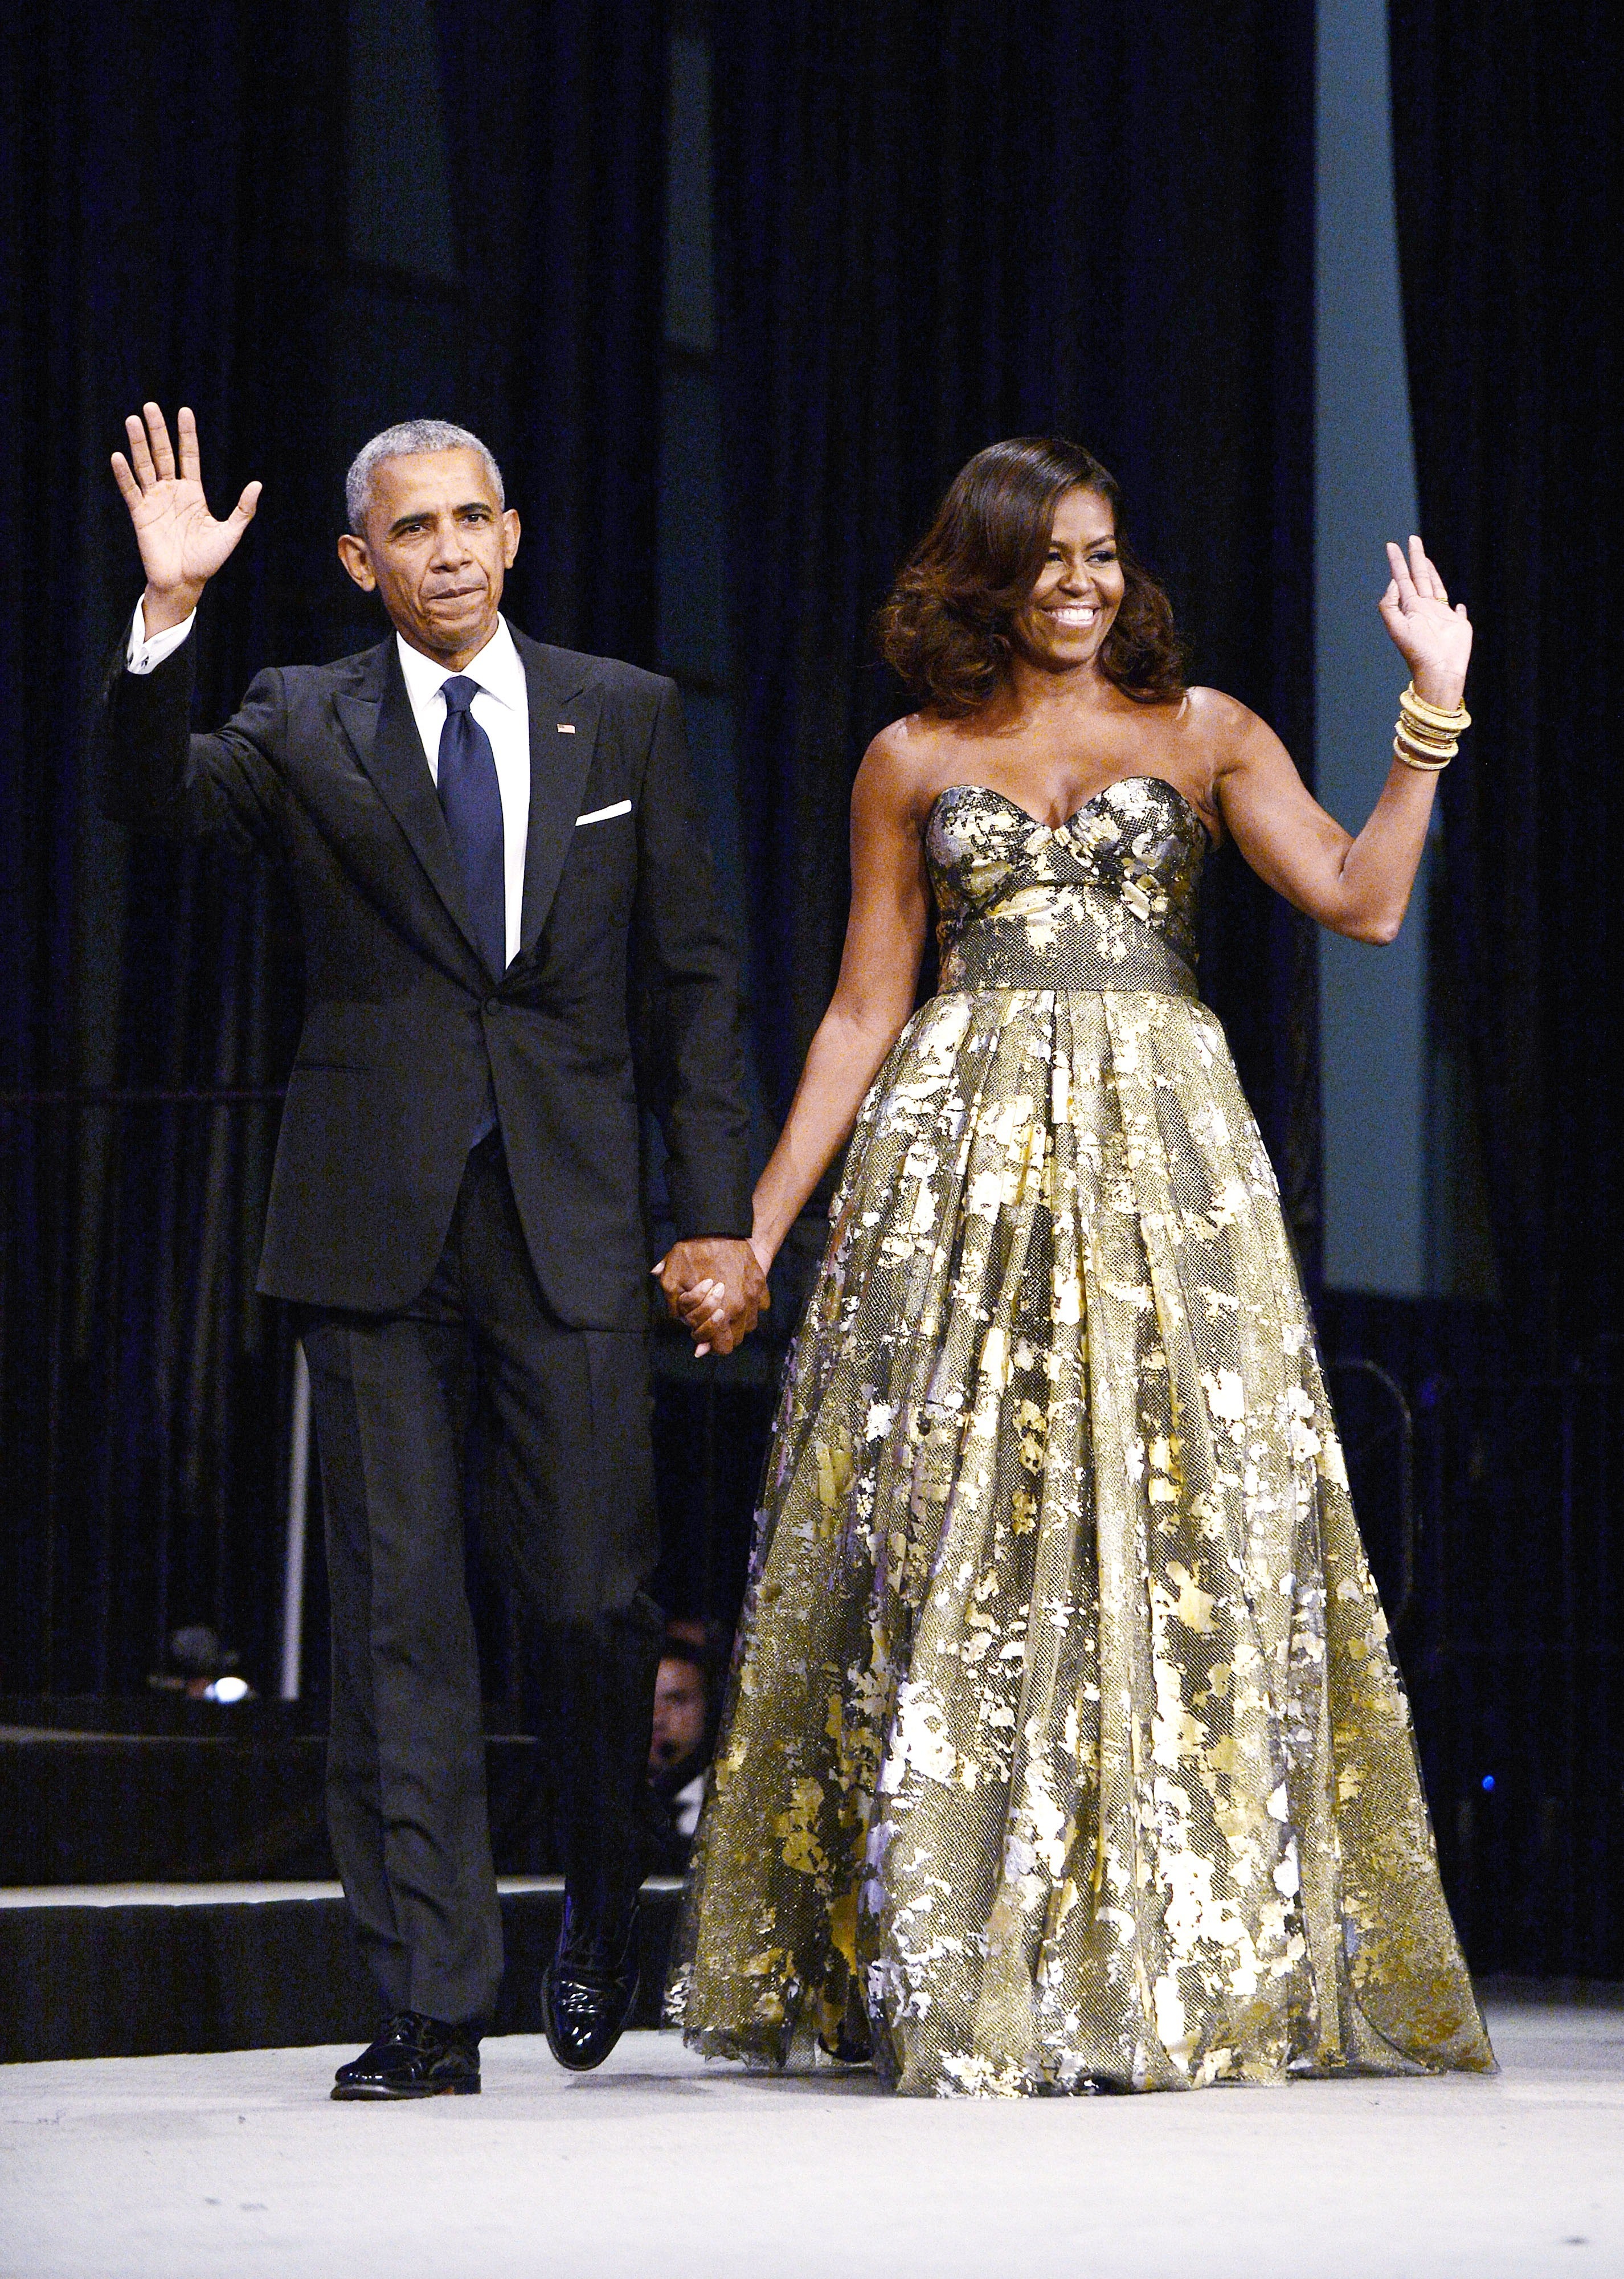 Details Of The Obamas’ Final White House Bash Are Leaking And It Sounds Epic